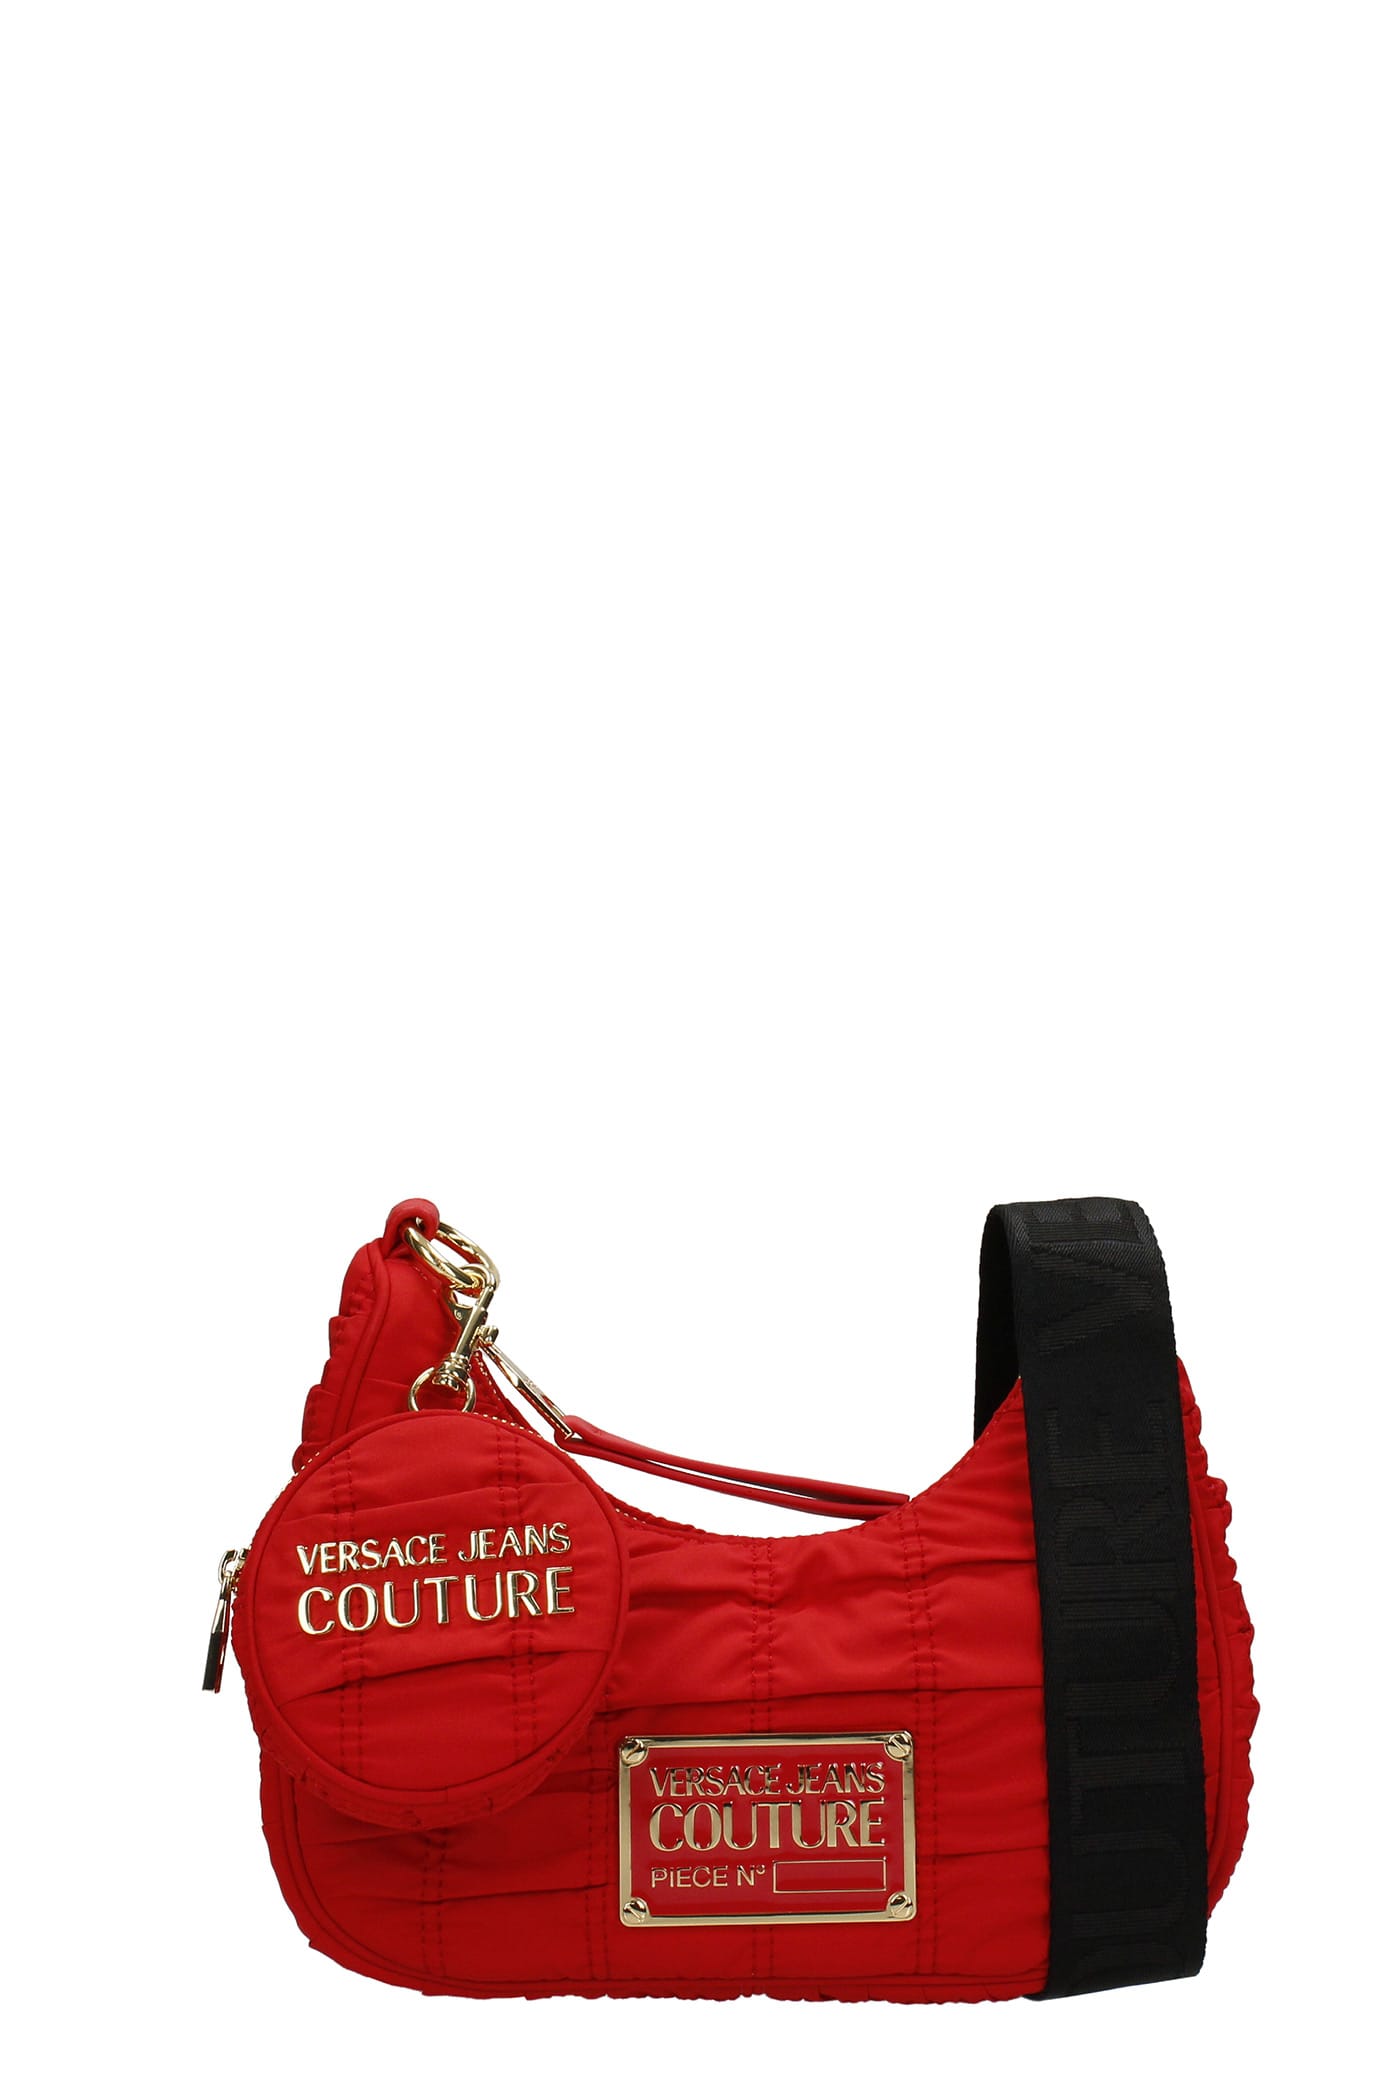 Versace Jeans Couture Shoulder Bag In Red Nylon